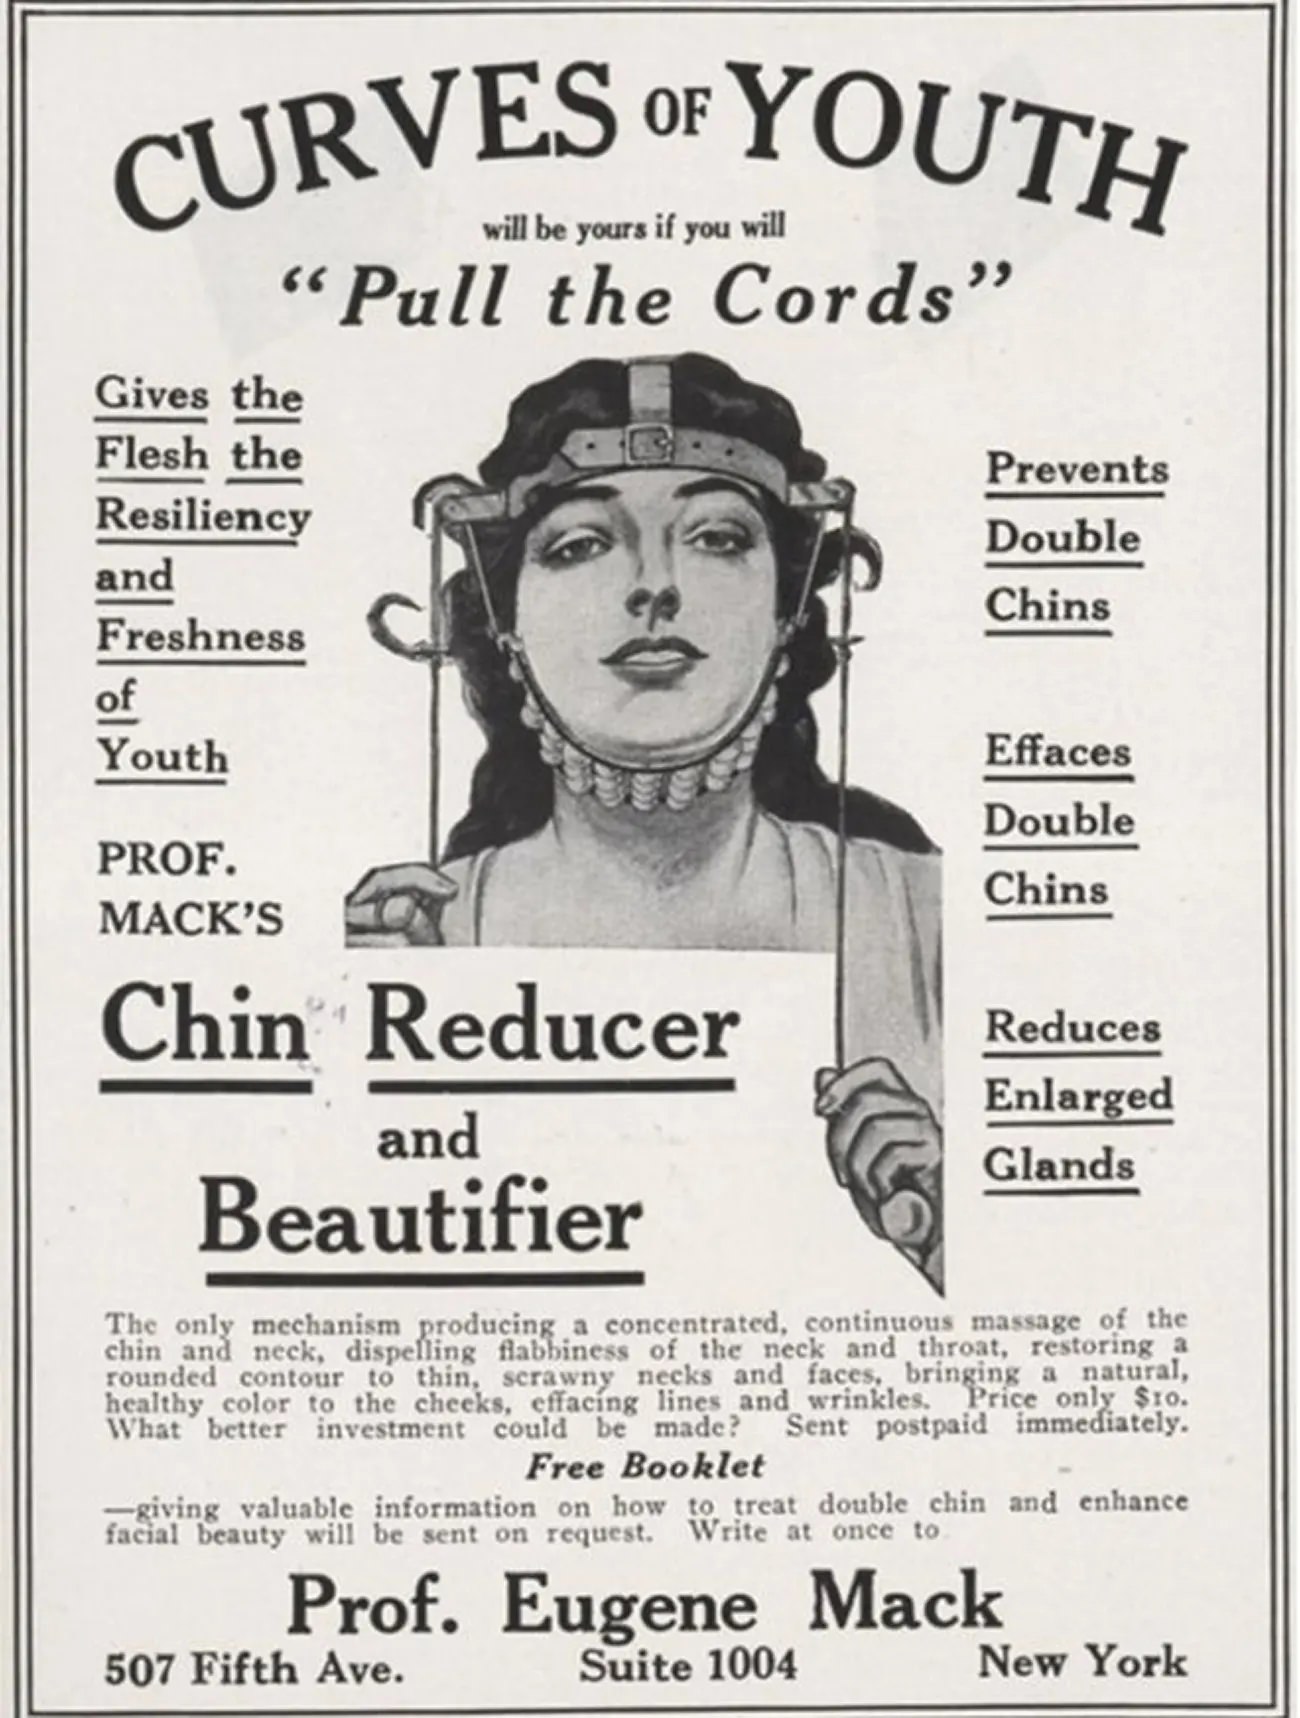 Chin Reducer and Beautifier.